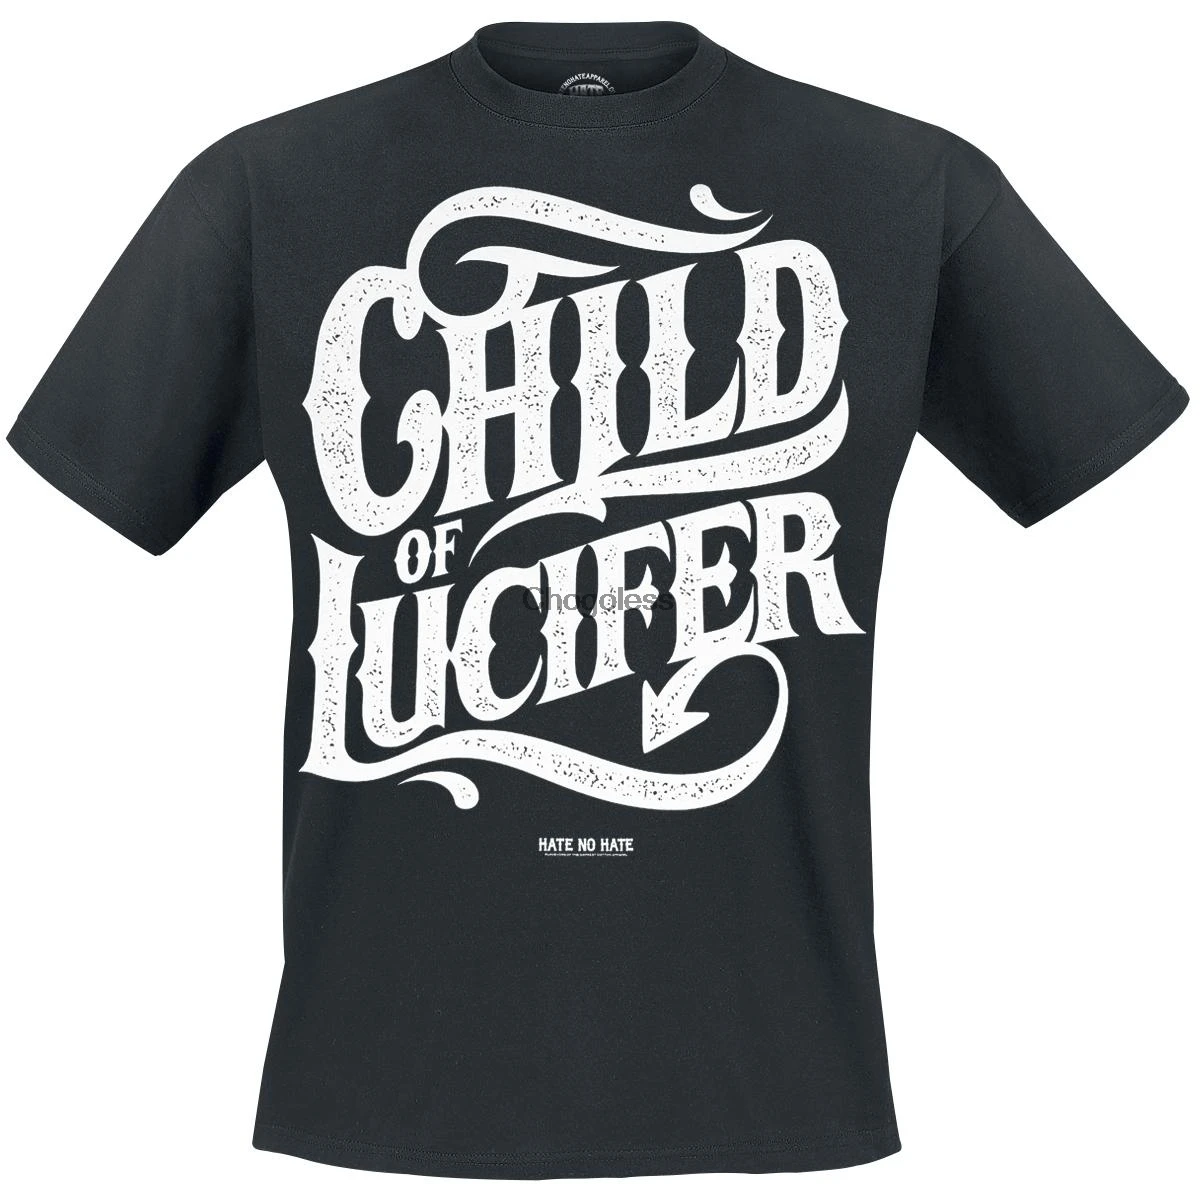 

Summer Fashion Short Sleeve Tee Tops Child of Lucifer Hate No Hate T-Shirt Mens High Quality Printed Tops Tees